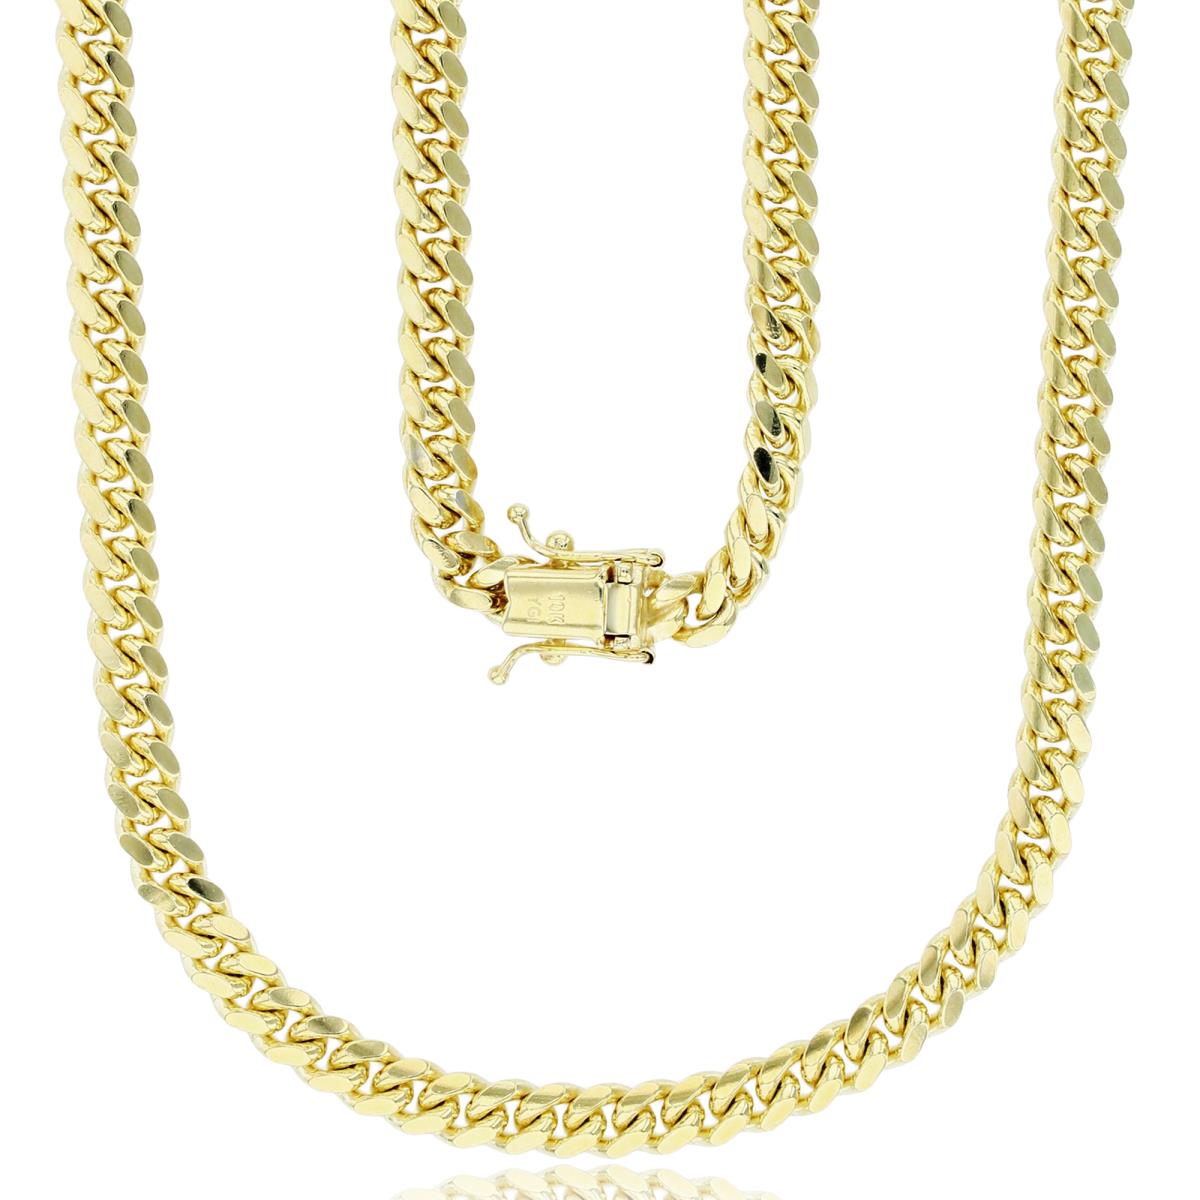 10K Yellow Gold 5.85mm 22" 160 Solid Miami Cuban Chain with Box Lock